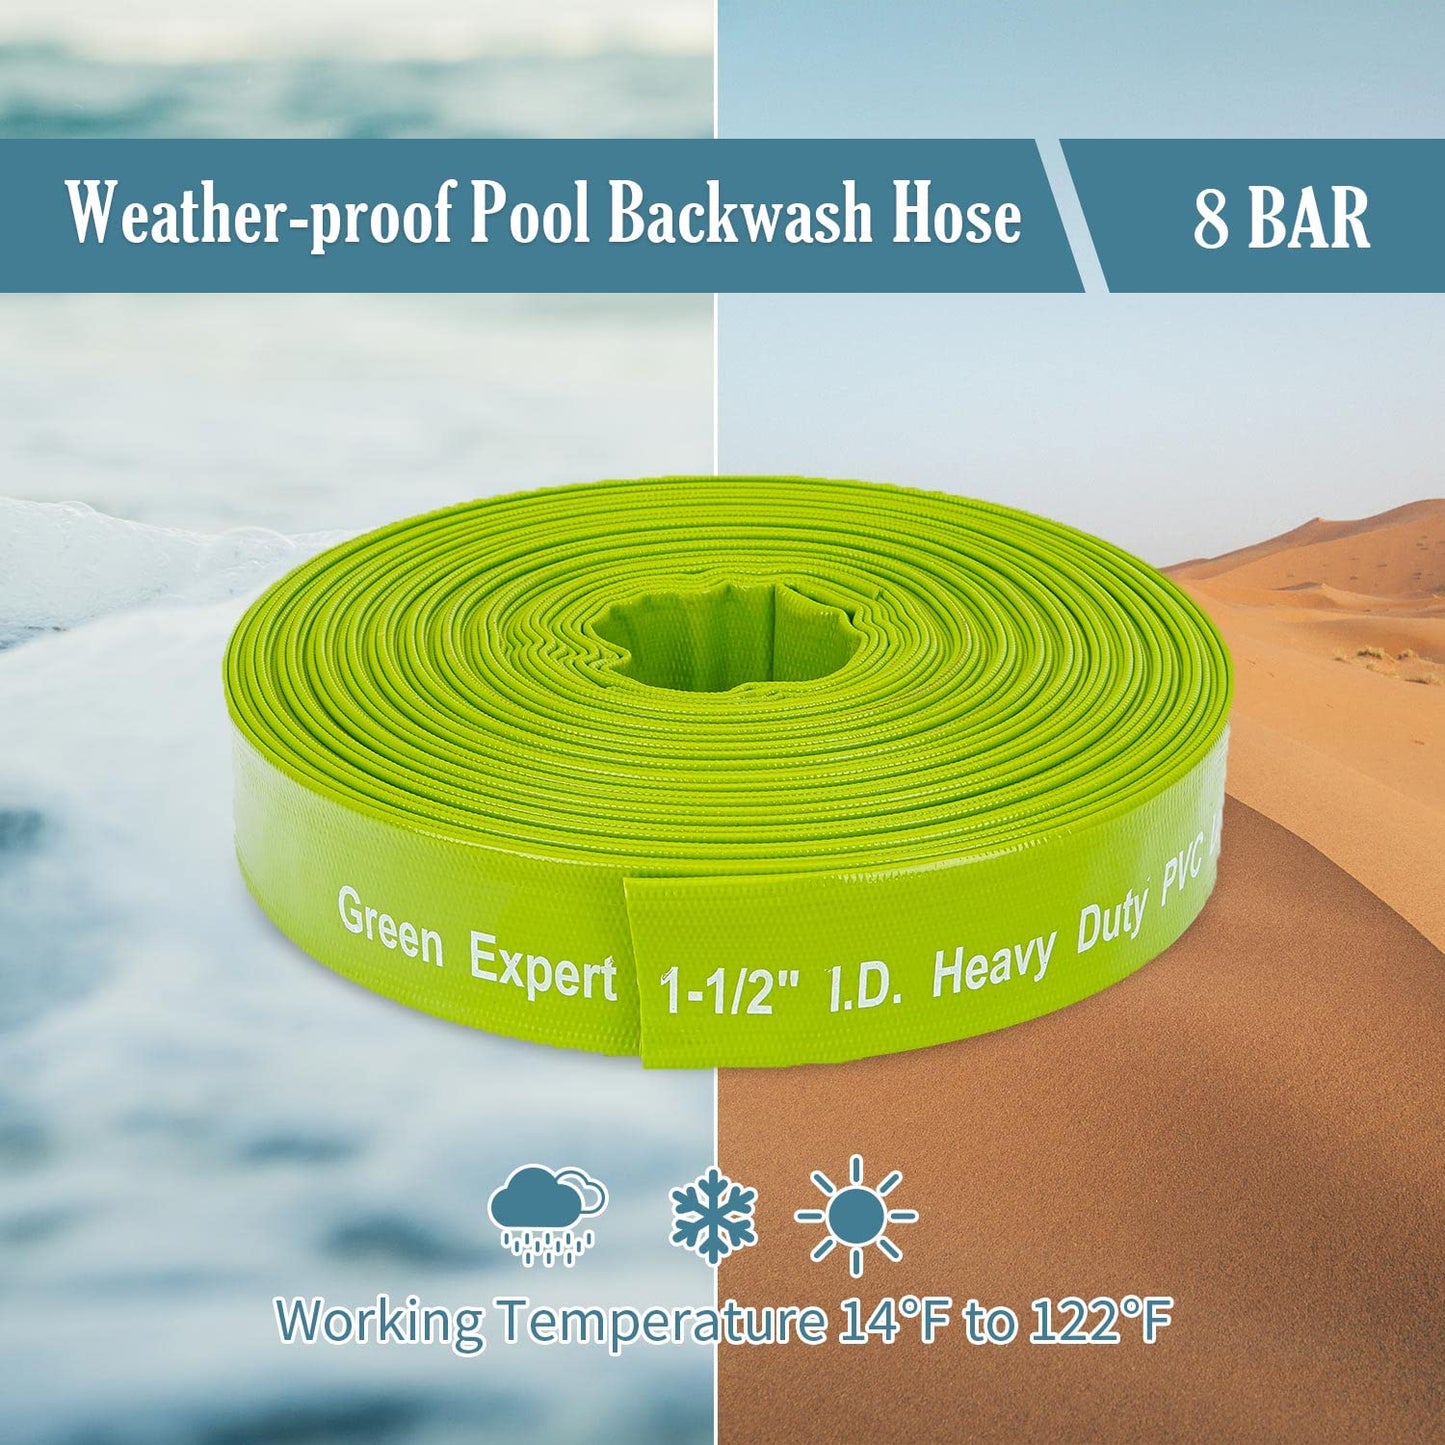 Green Expert 1-1/2" ID PVC Lay-Flat Discharge and Backwash Hose 100 Feet Heavy Duty Pool Hose with Clamps Easy Installation for Water Removal Compatible with Filters Pumps 527504